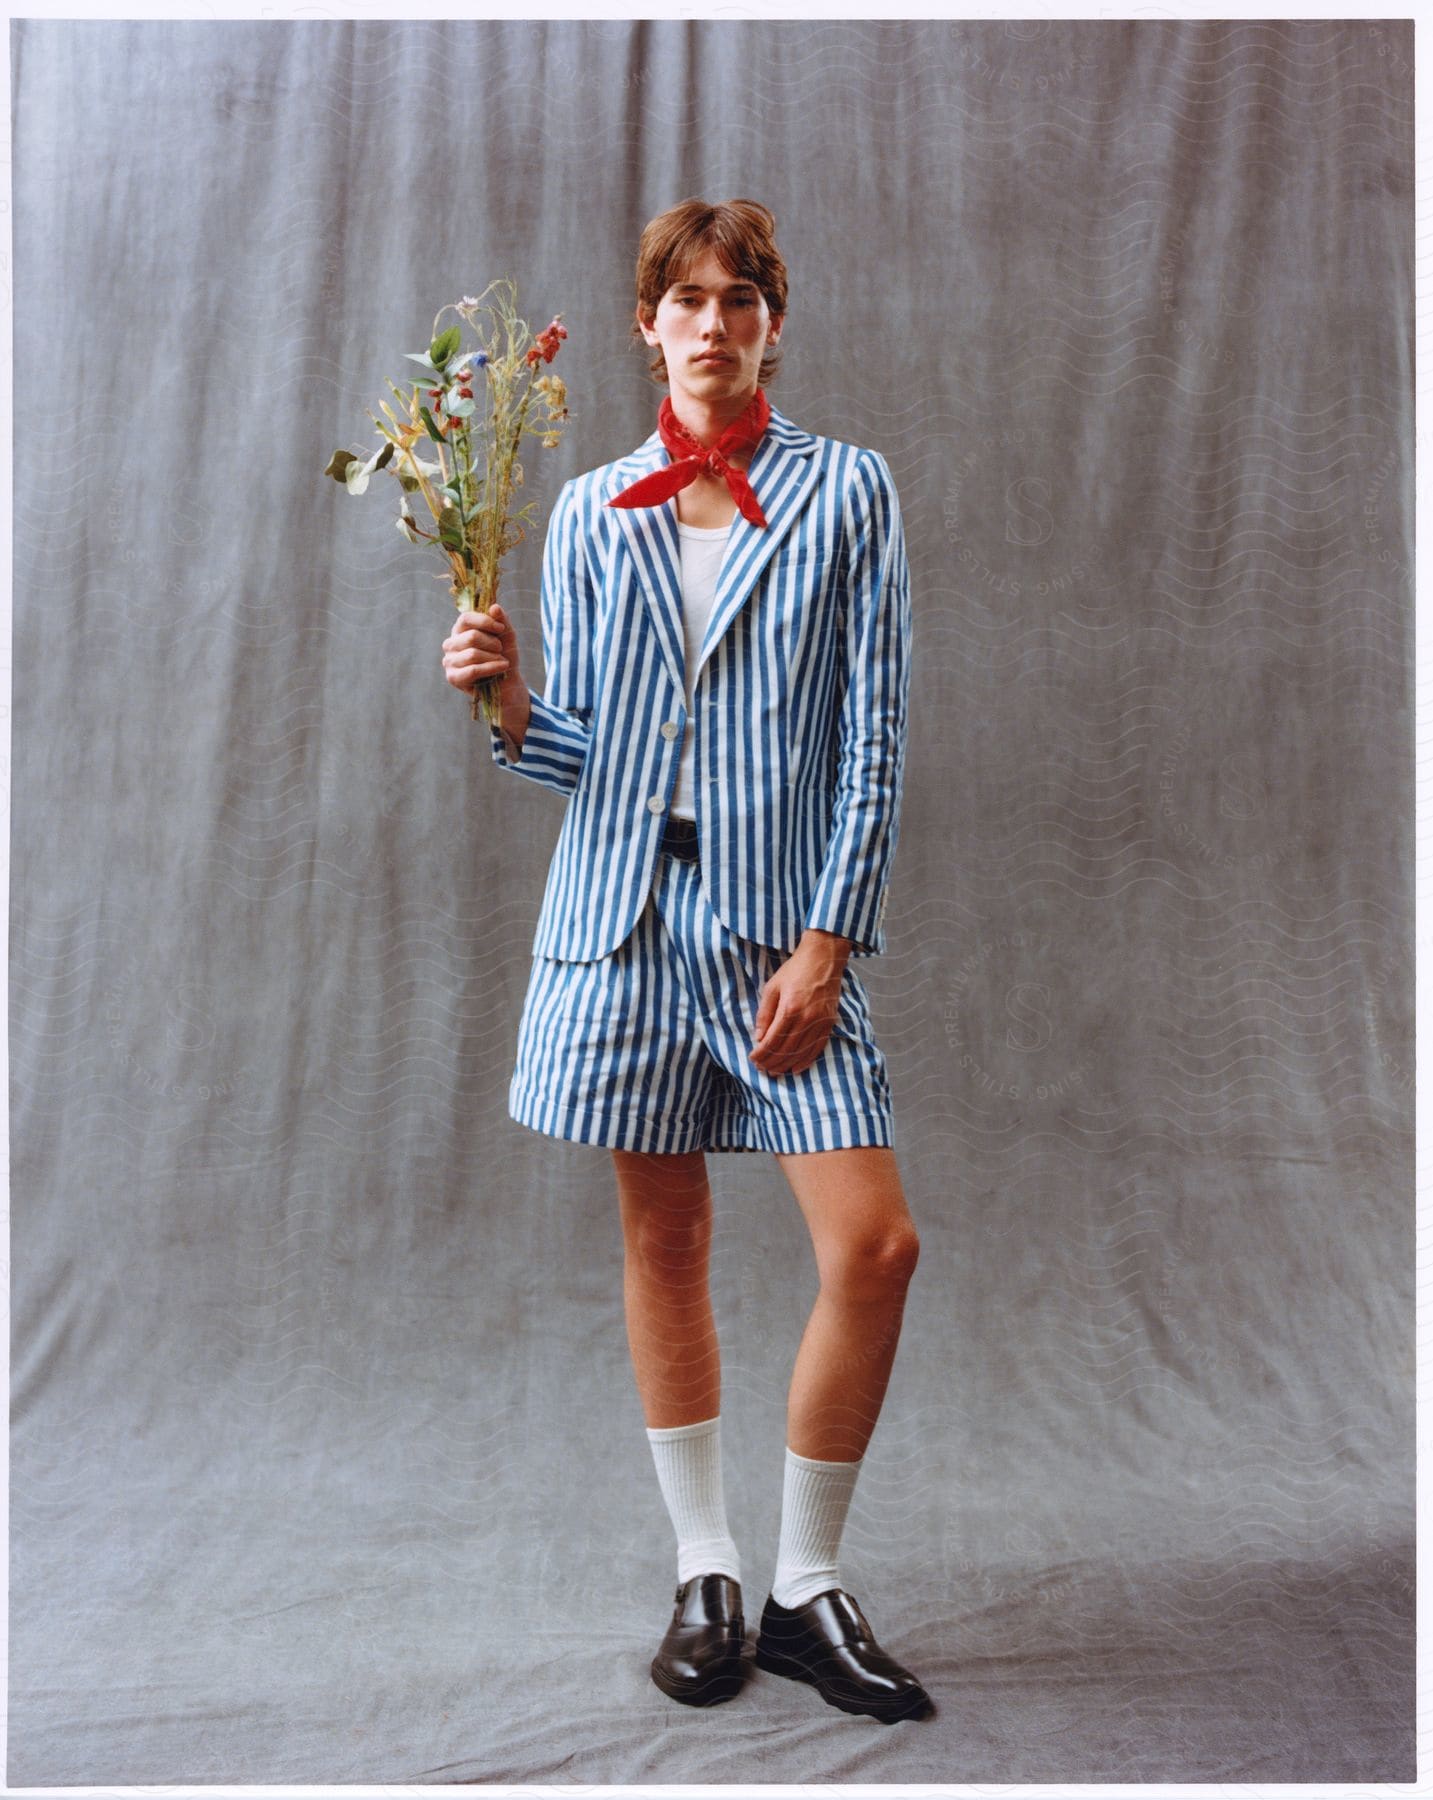 Young man modeling a quirky outfit while holding flowers